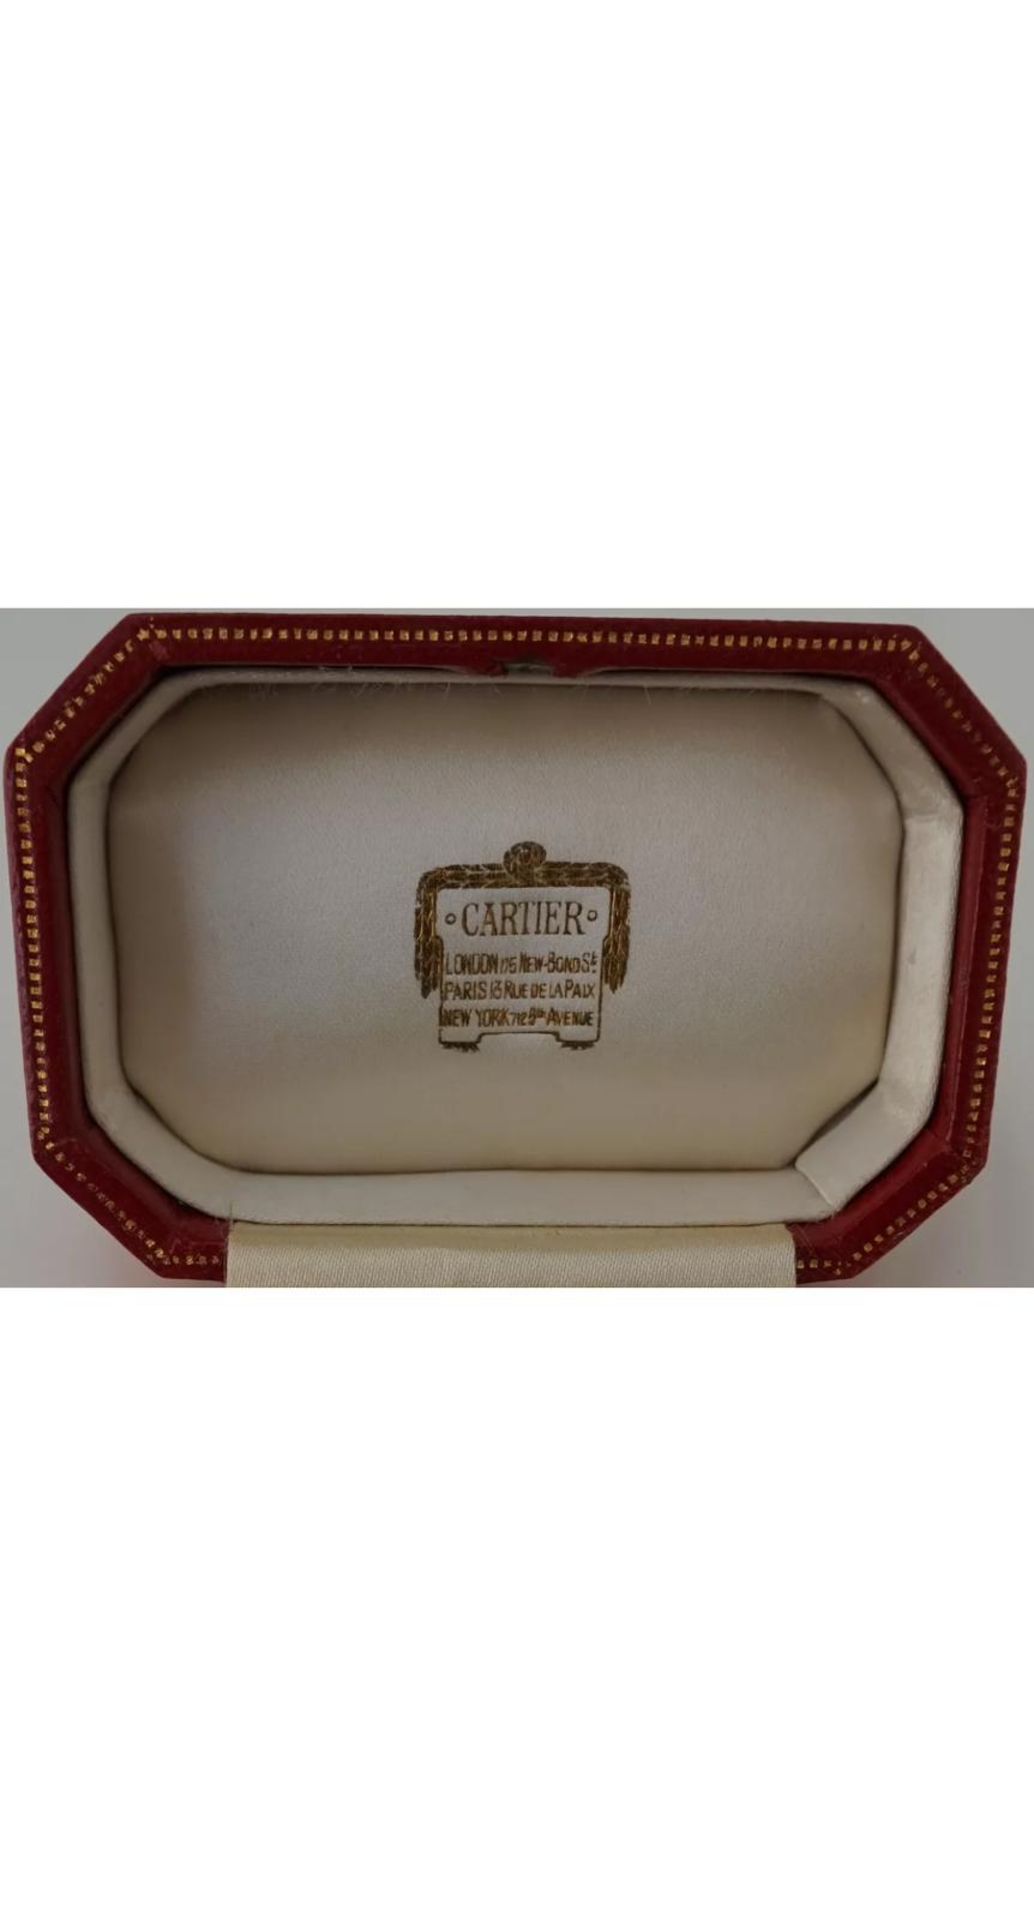 Stunning & Fine Vintage Cartier 18ct Yellow Gold Cuff Links in their Original Cartier Box - Image 6 of 7